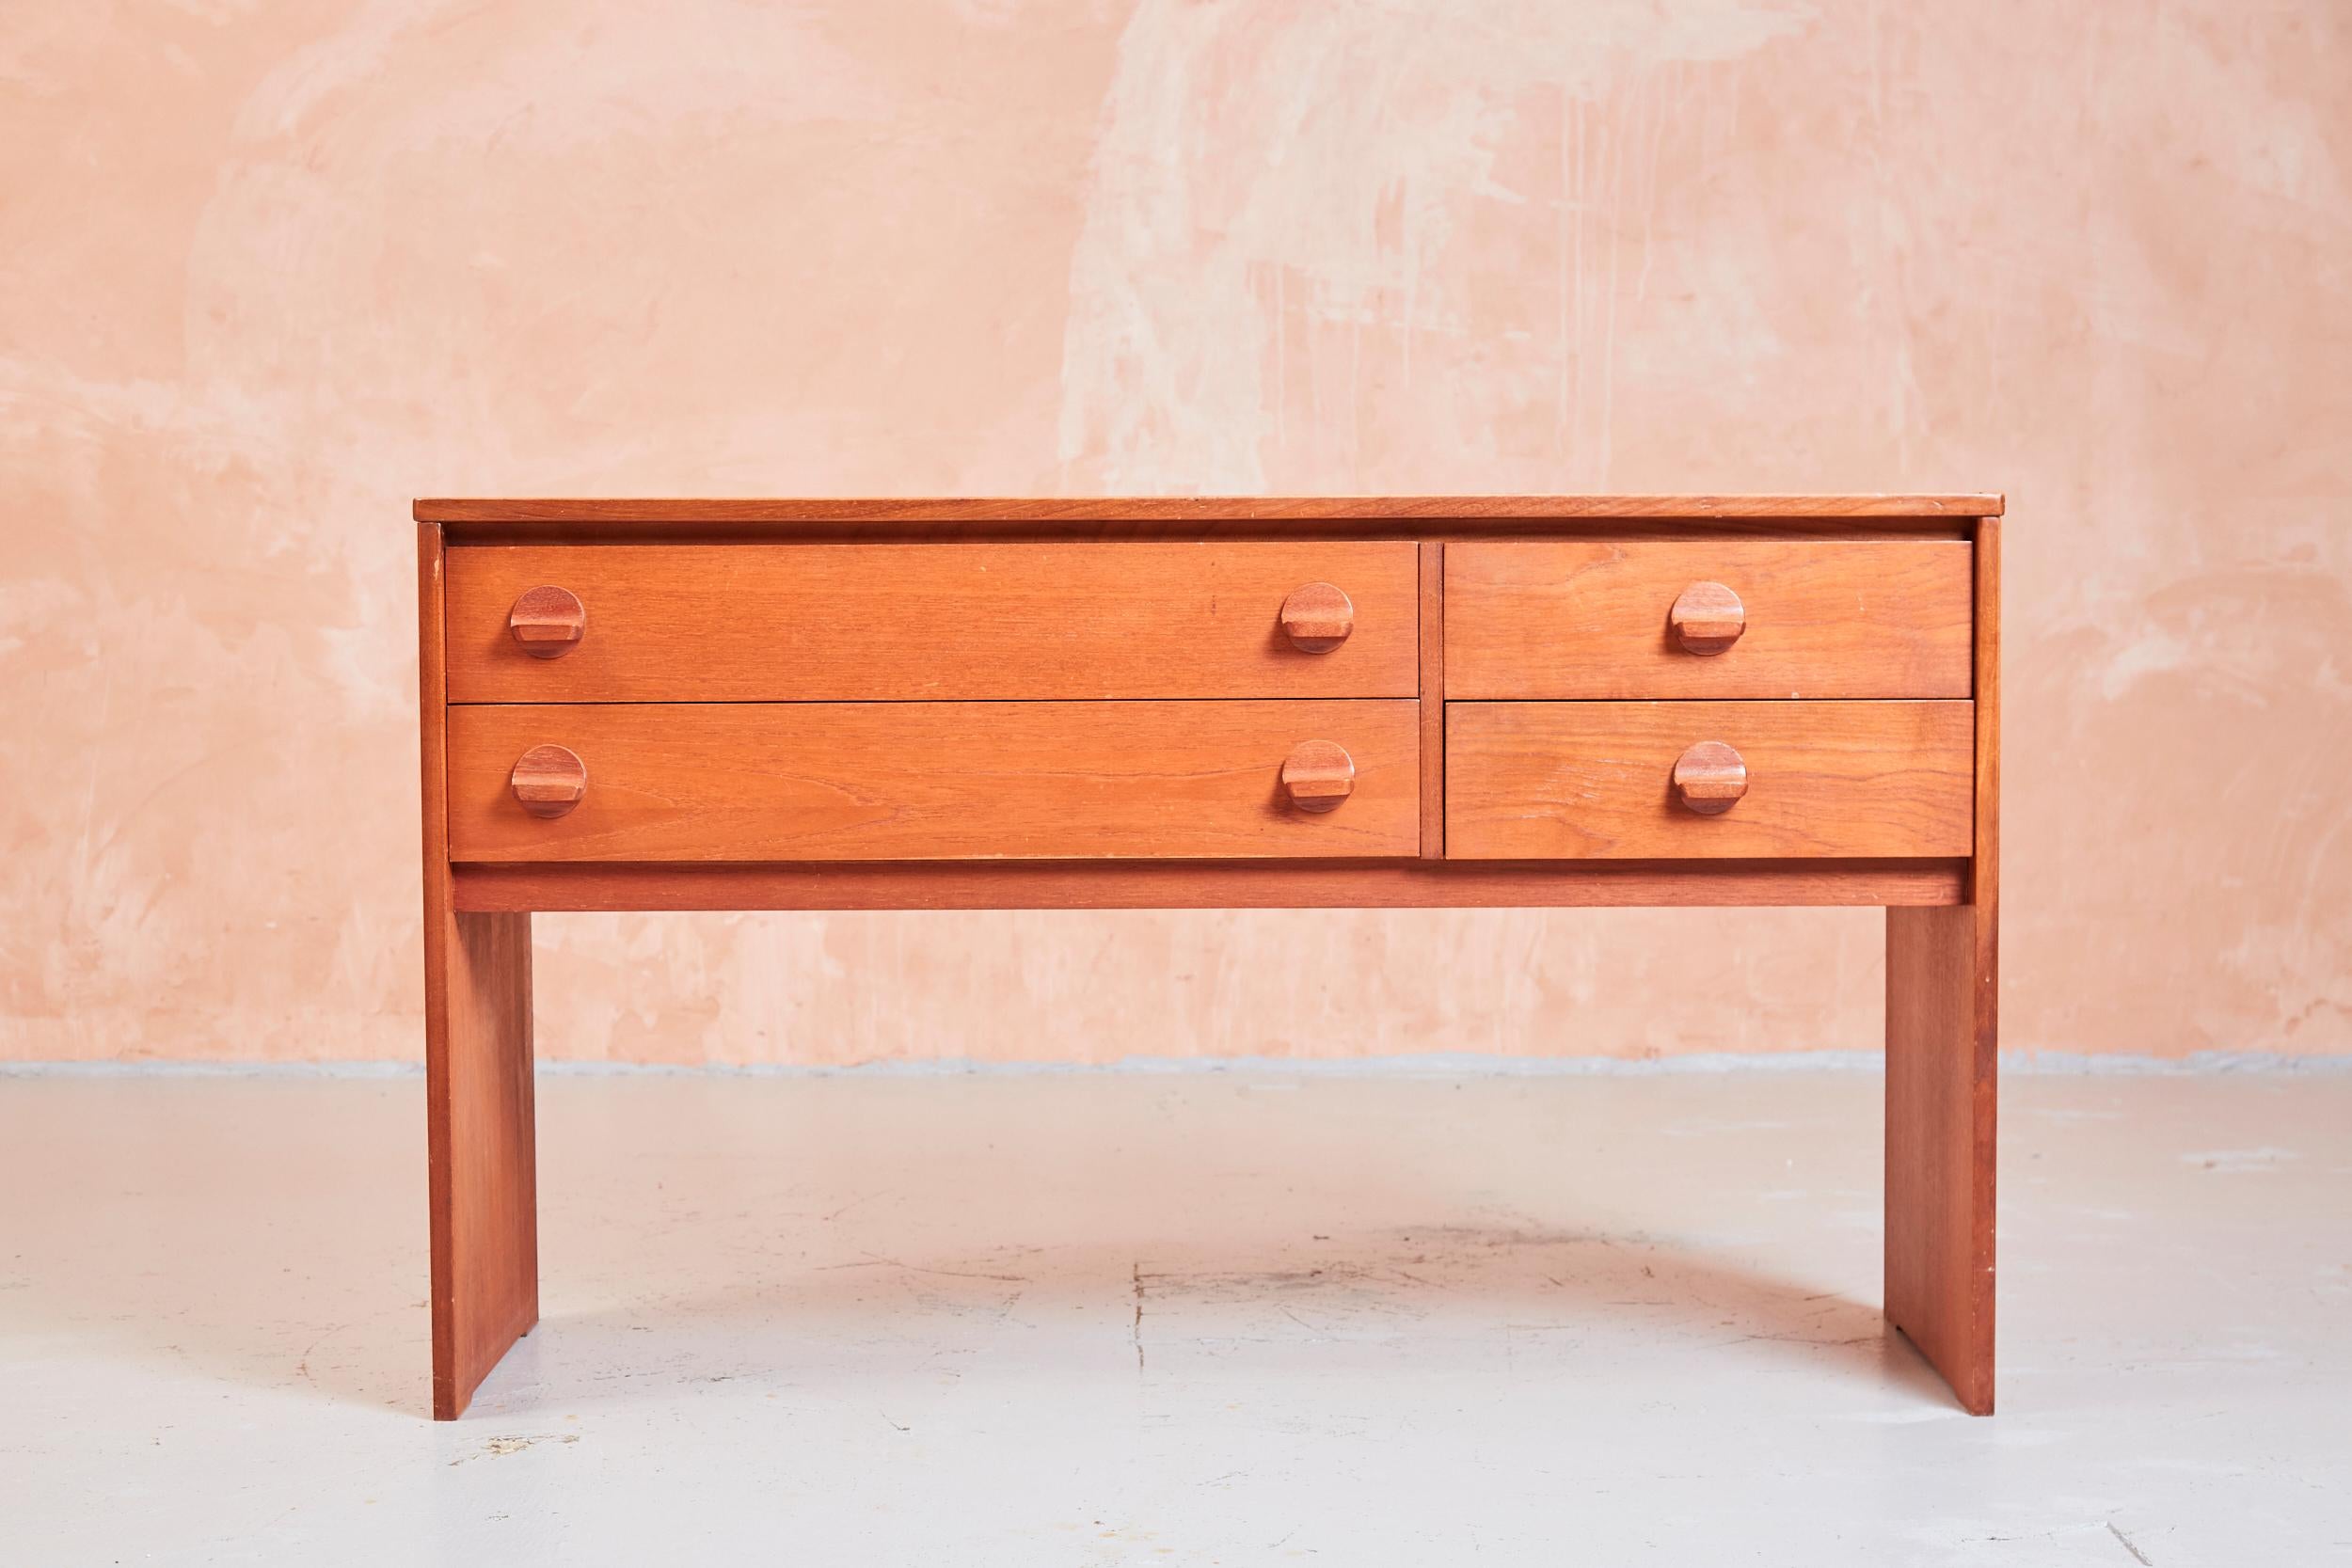 Stag Console With Drawers In Teak, Mid Century, John & Sylvia Reid, 1960s For Sale 4